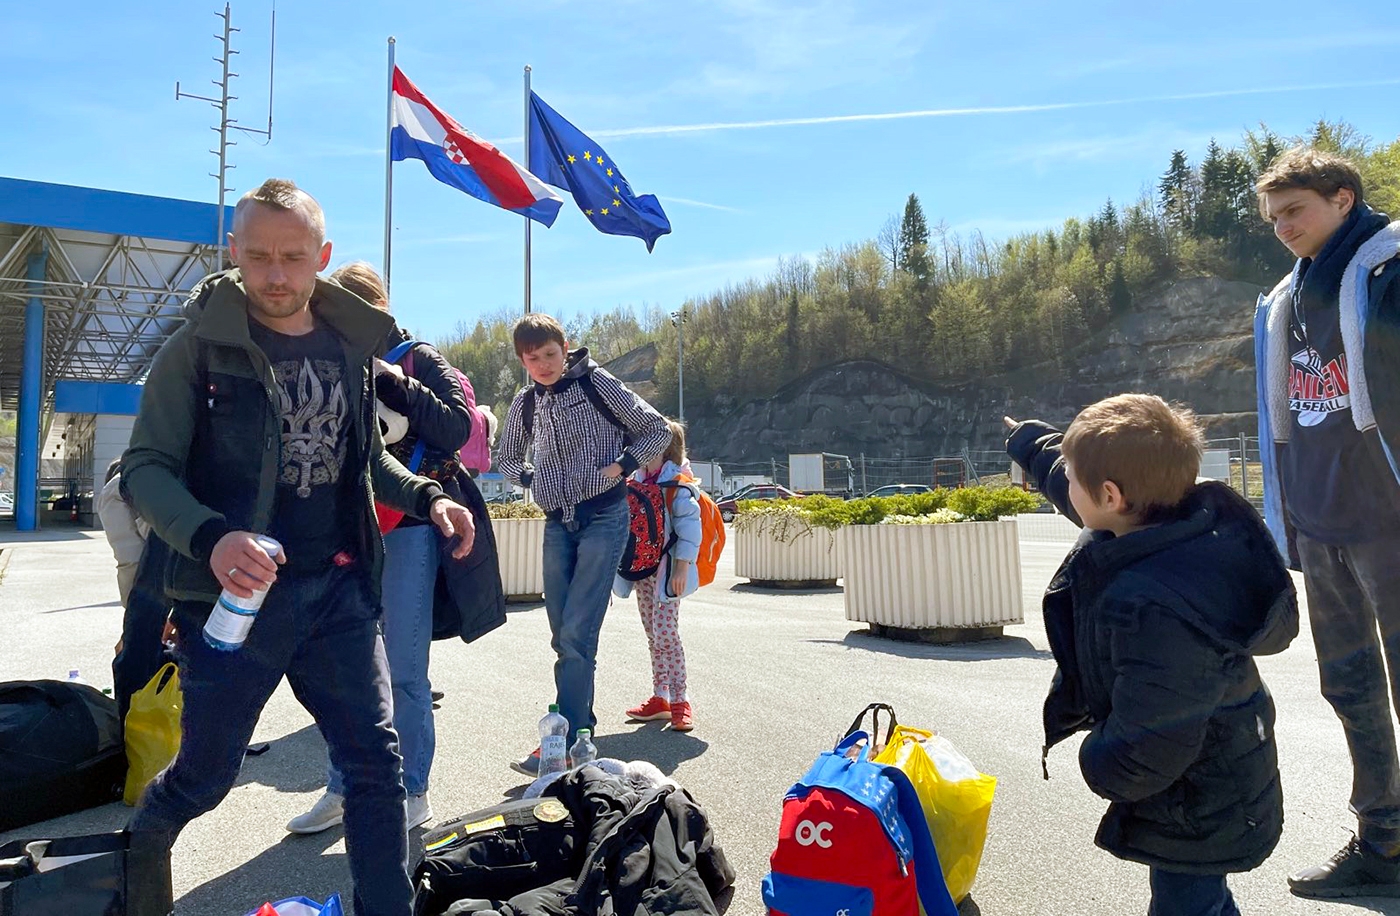 Xander and the children arrive at the Croatian border.